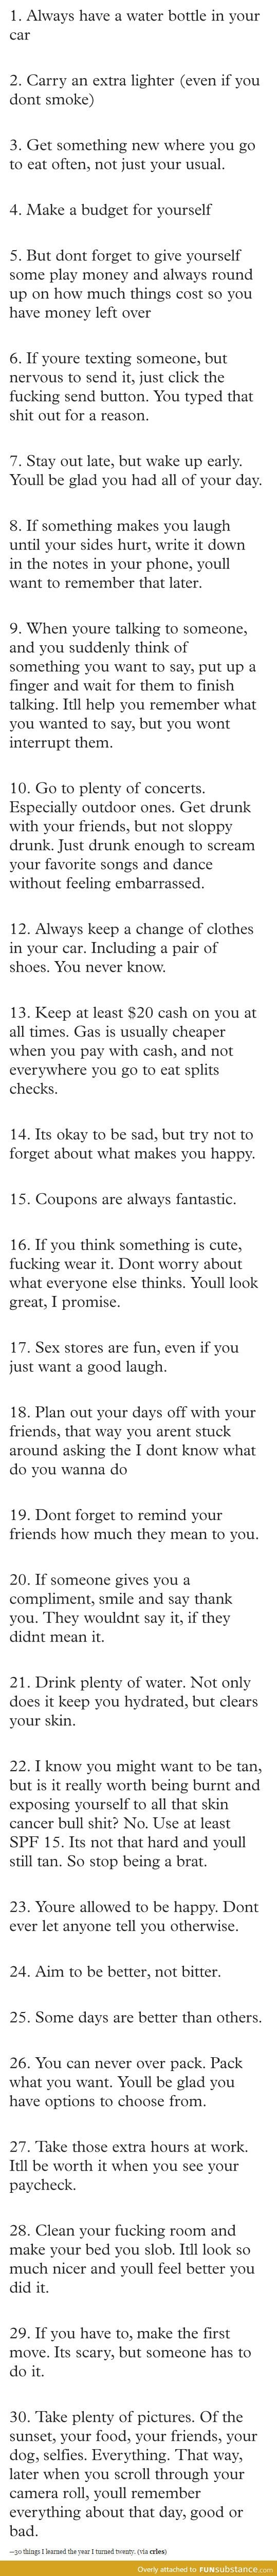 30 simple life lessons